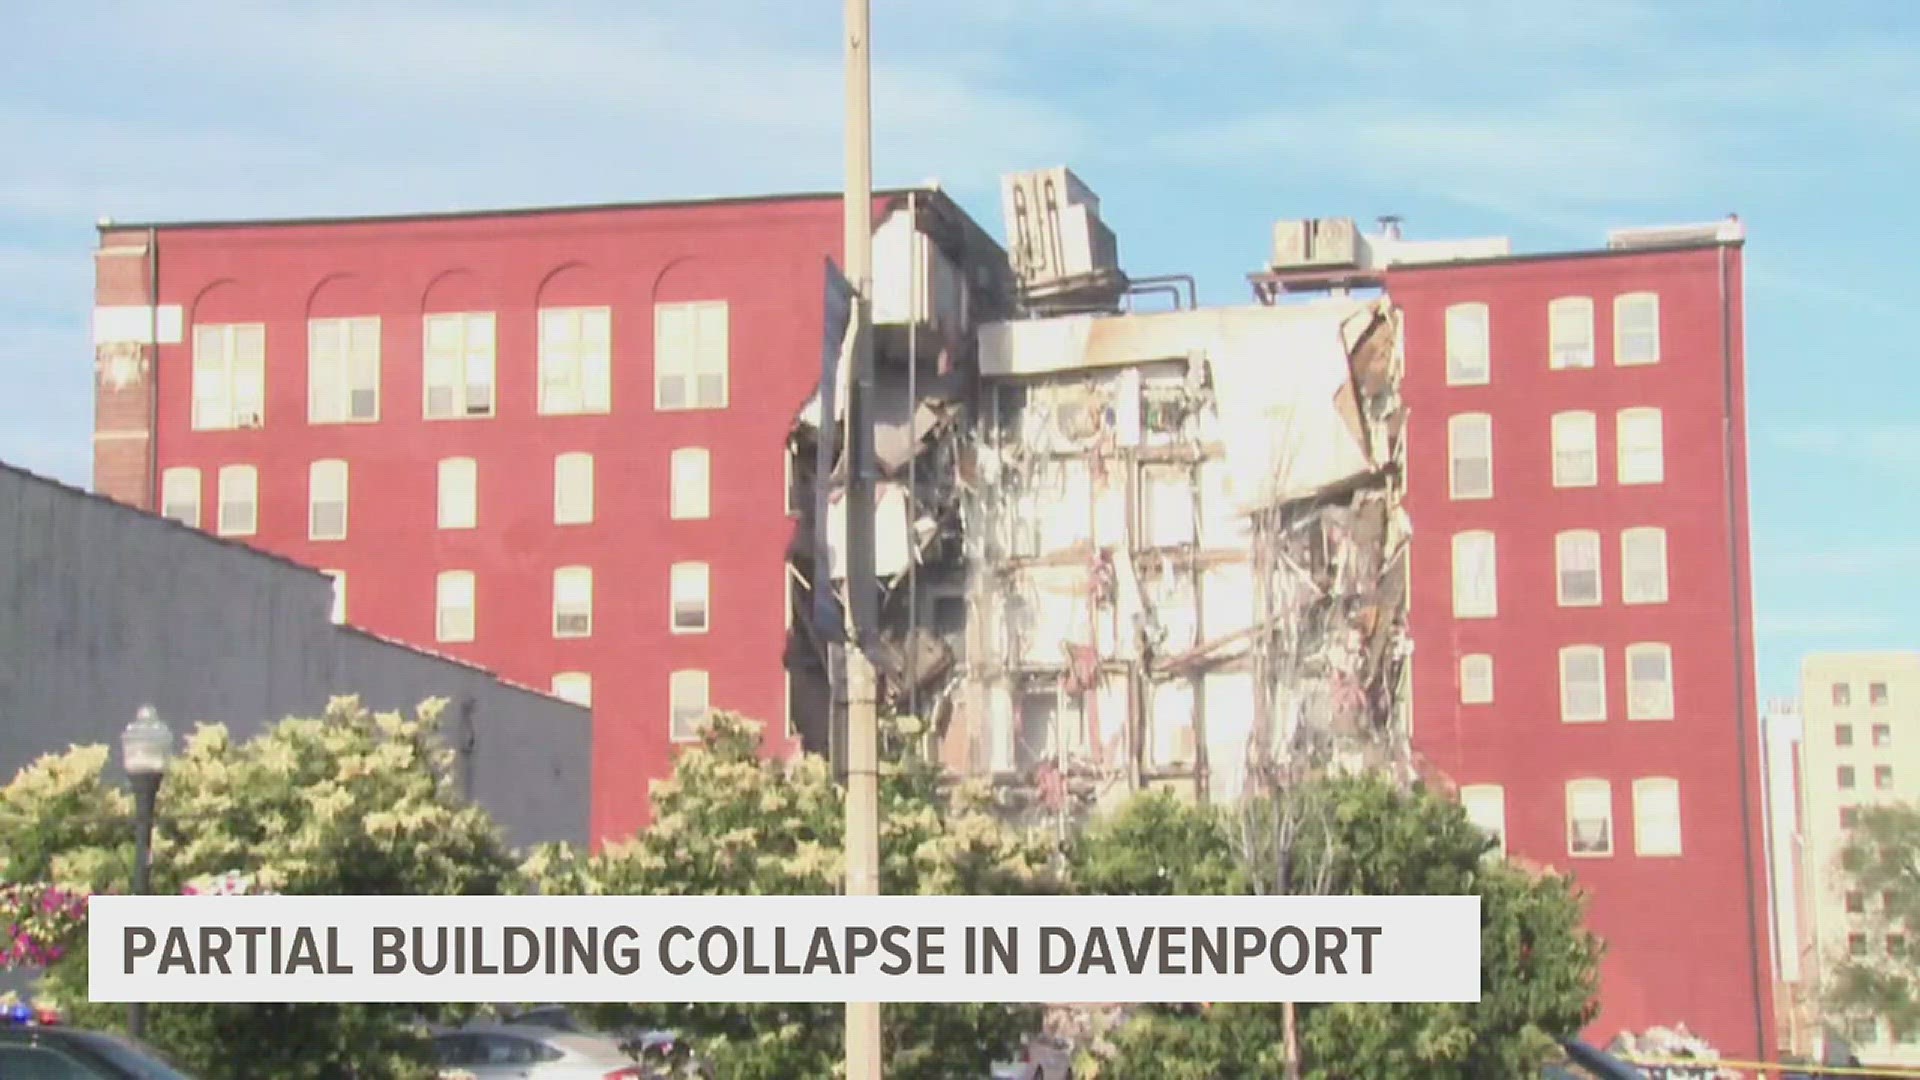 Some residents are unaccounted for as of late Sunday night after 6 floors of the building collapsed just before 5 p.m. on Sunday.